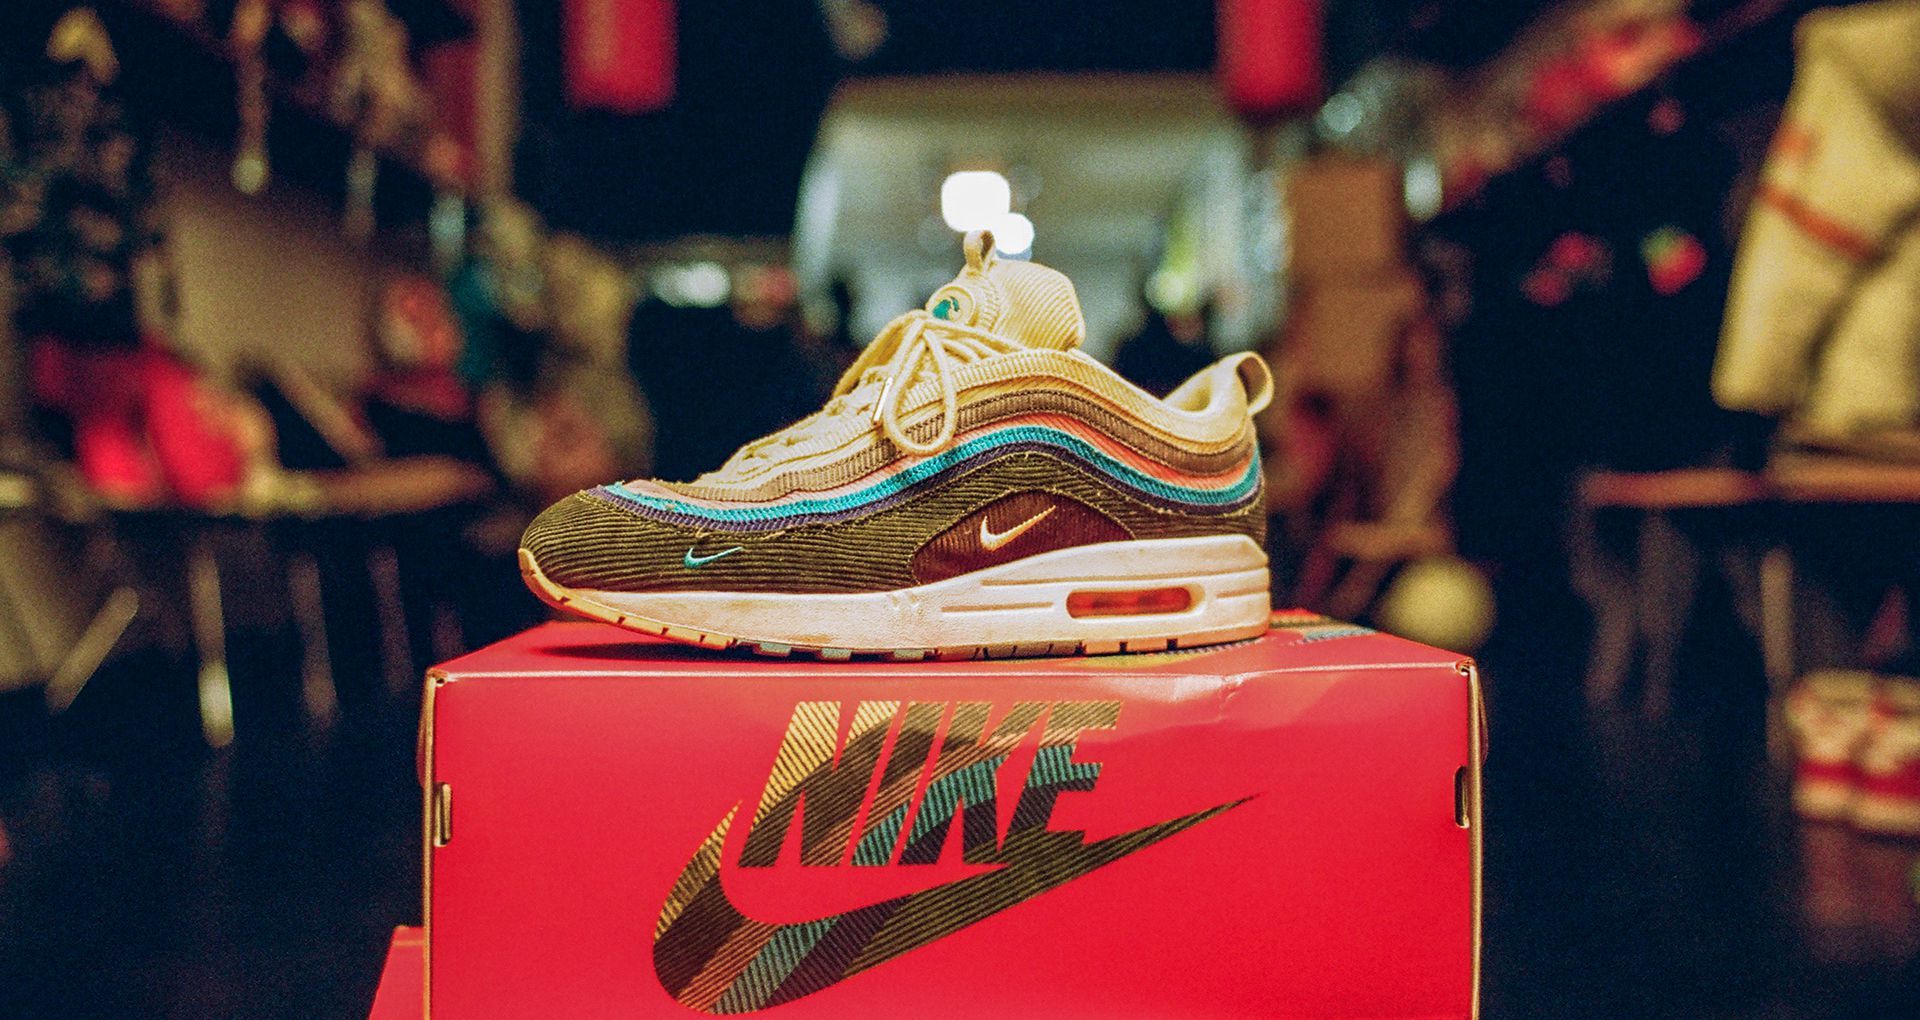 The Nike Air Max 97/1 Sean Wotherspoon: where everything started